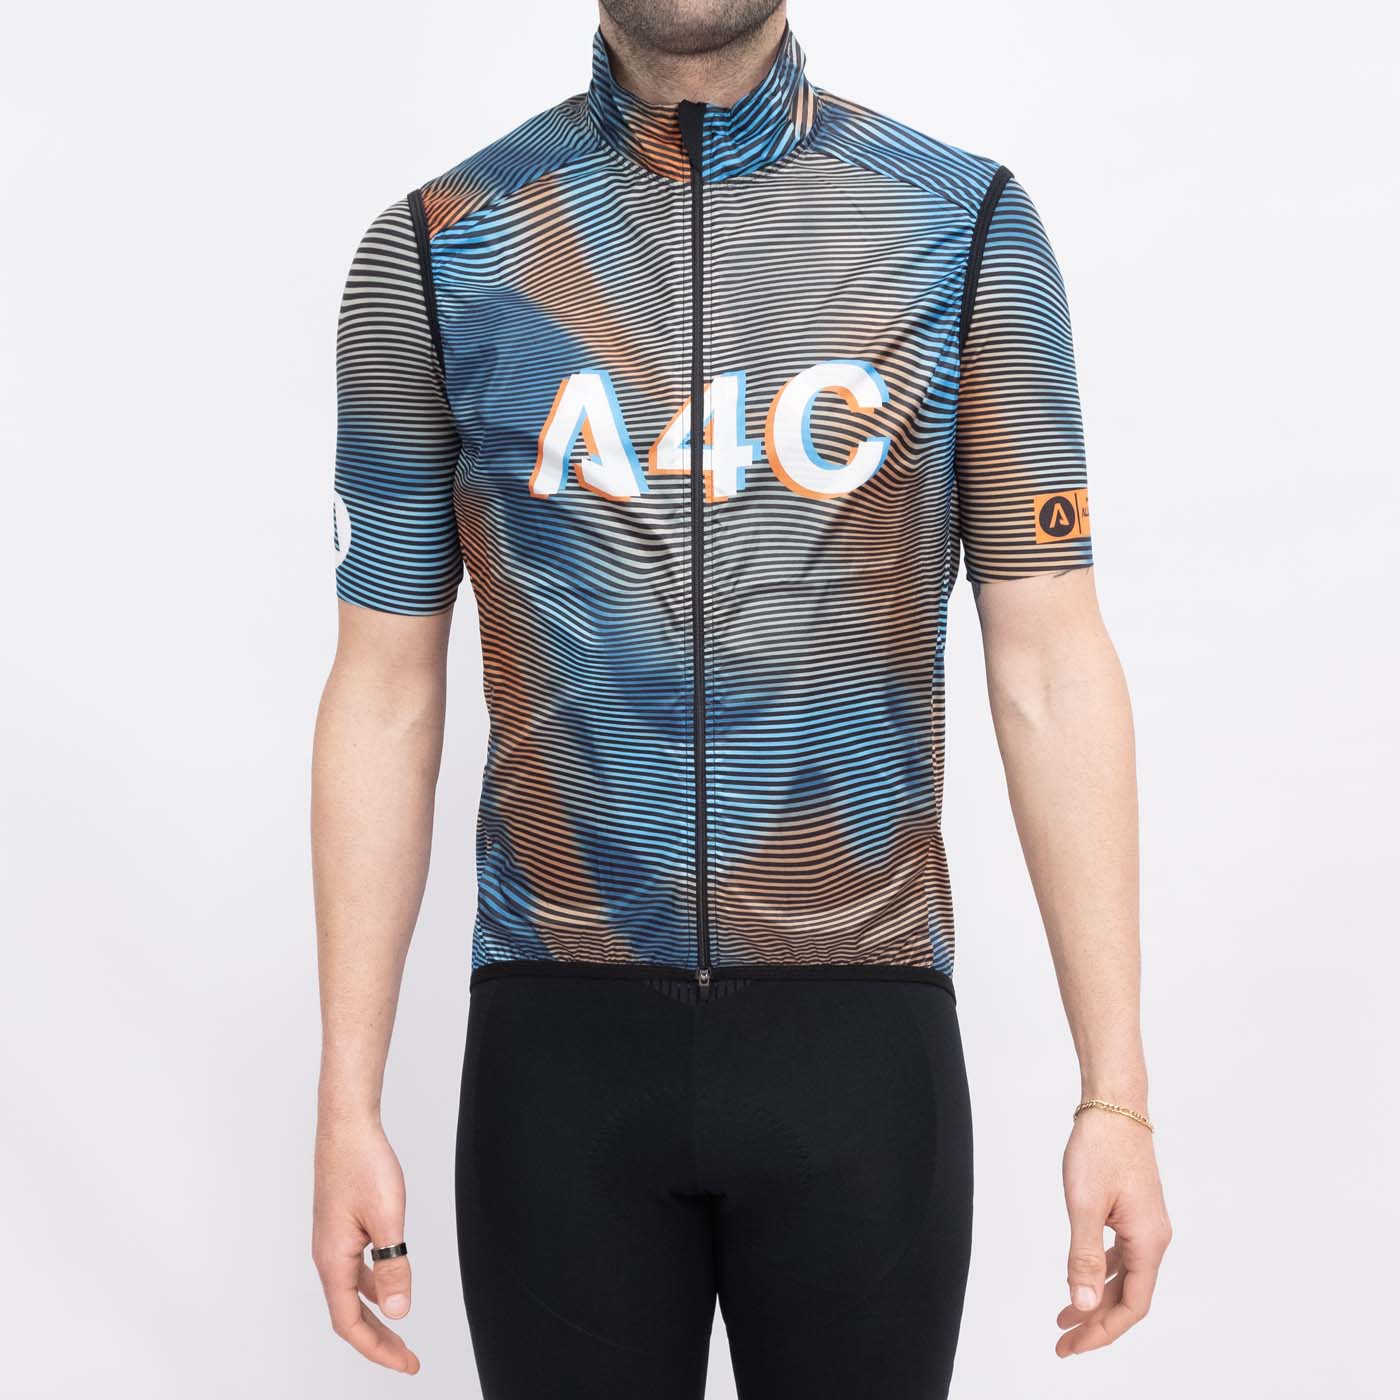 All4cycling Team Vest